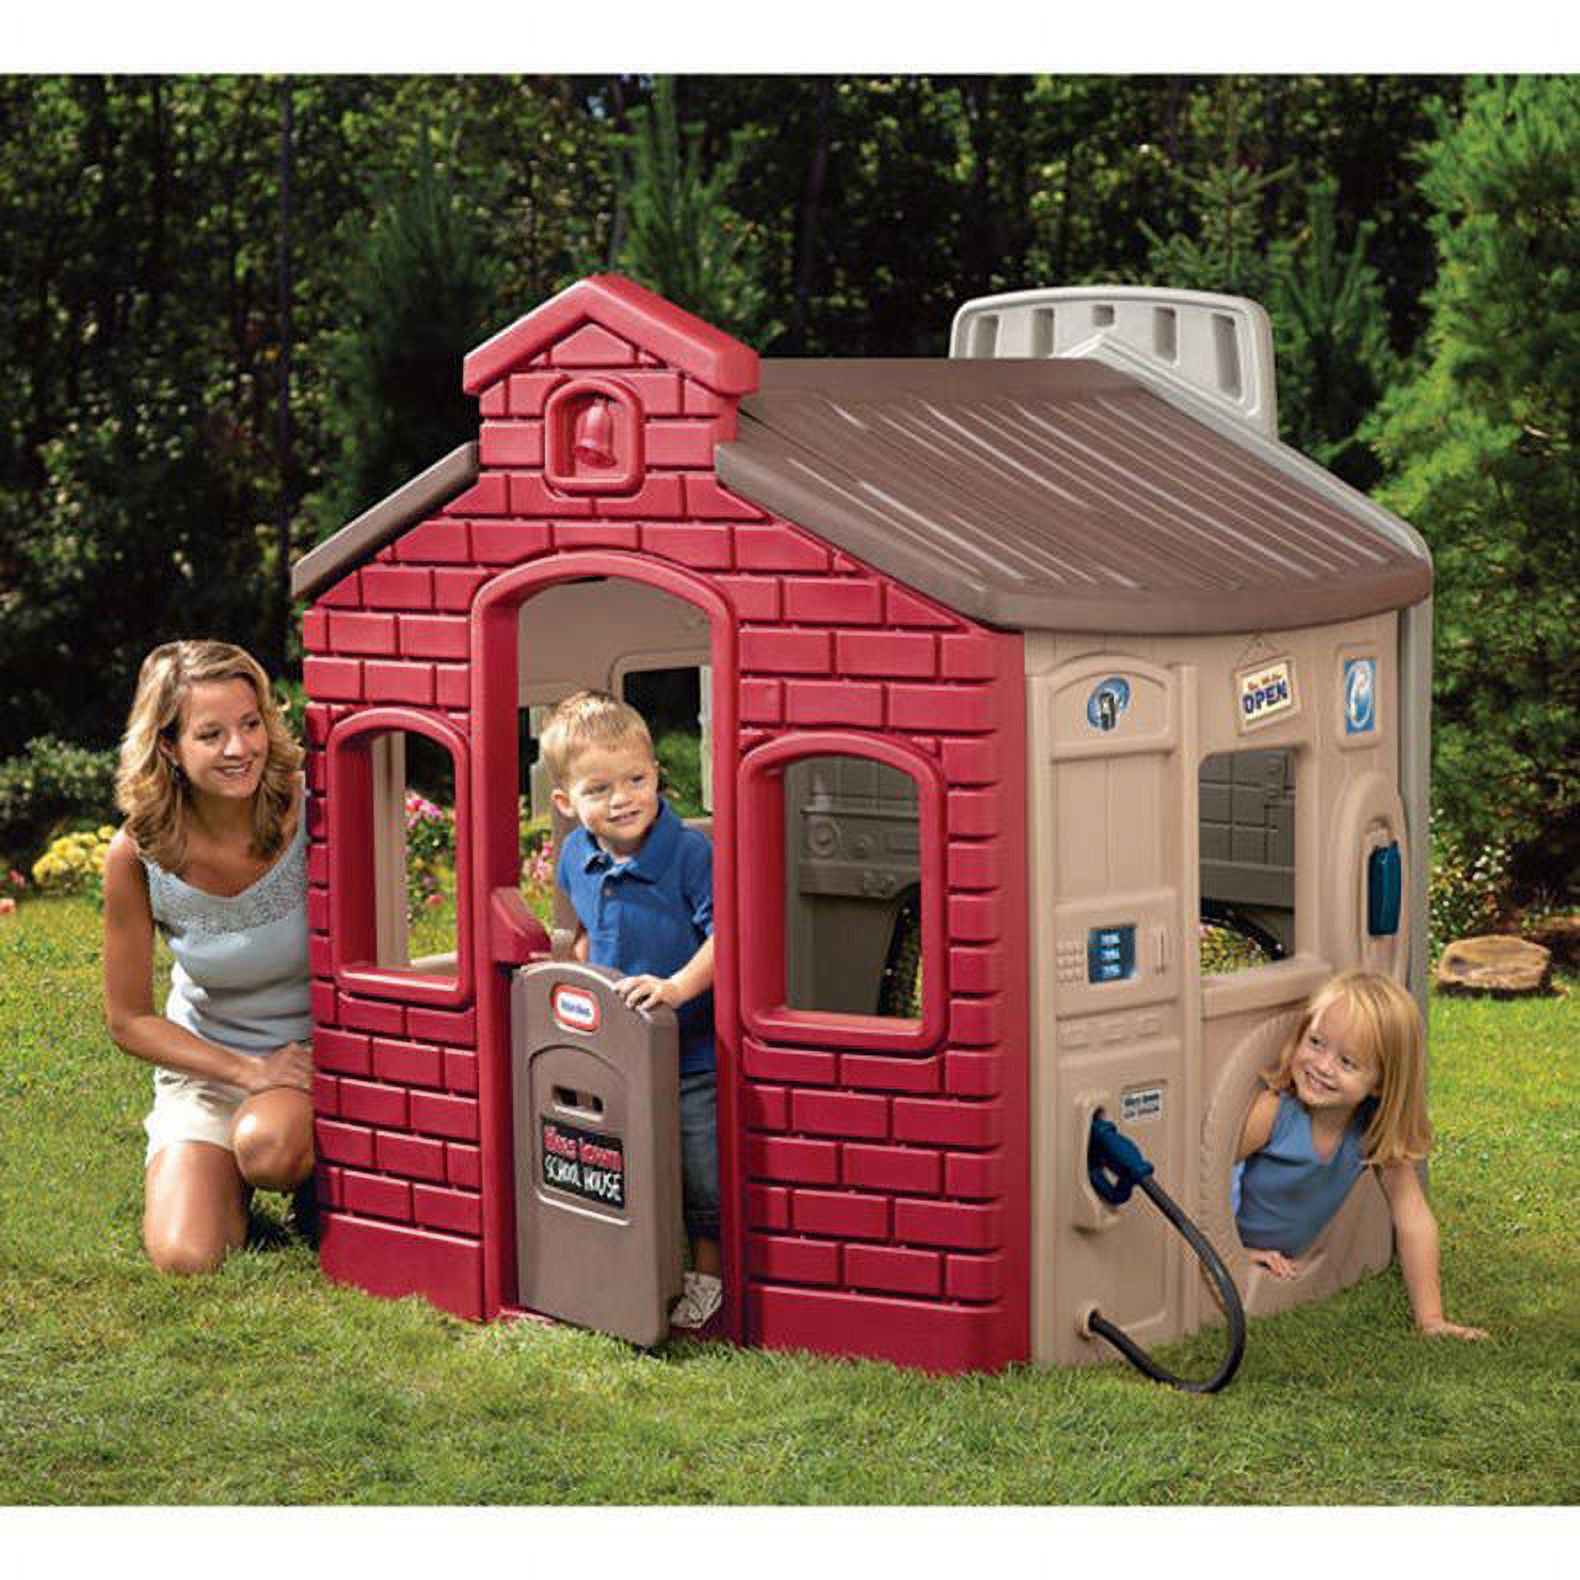 Little Tikes Town Playhouse, Features Market, Gas Station, and Sports Center - image 7 of 8